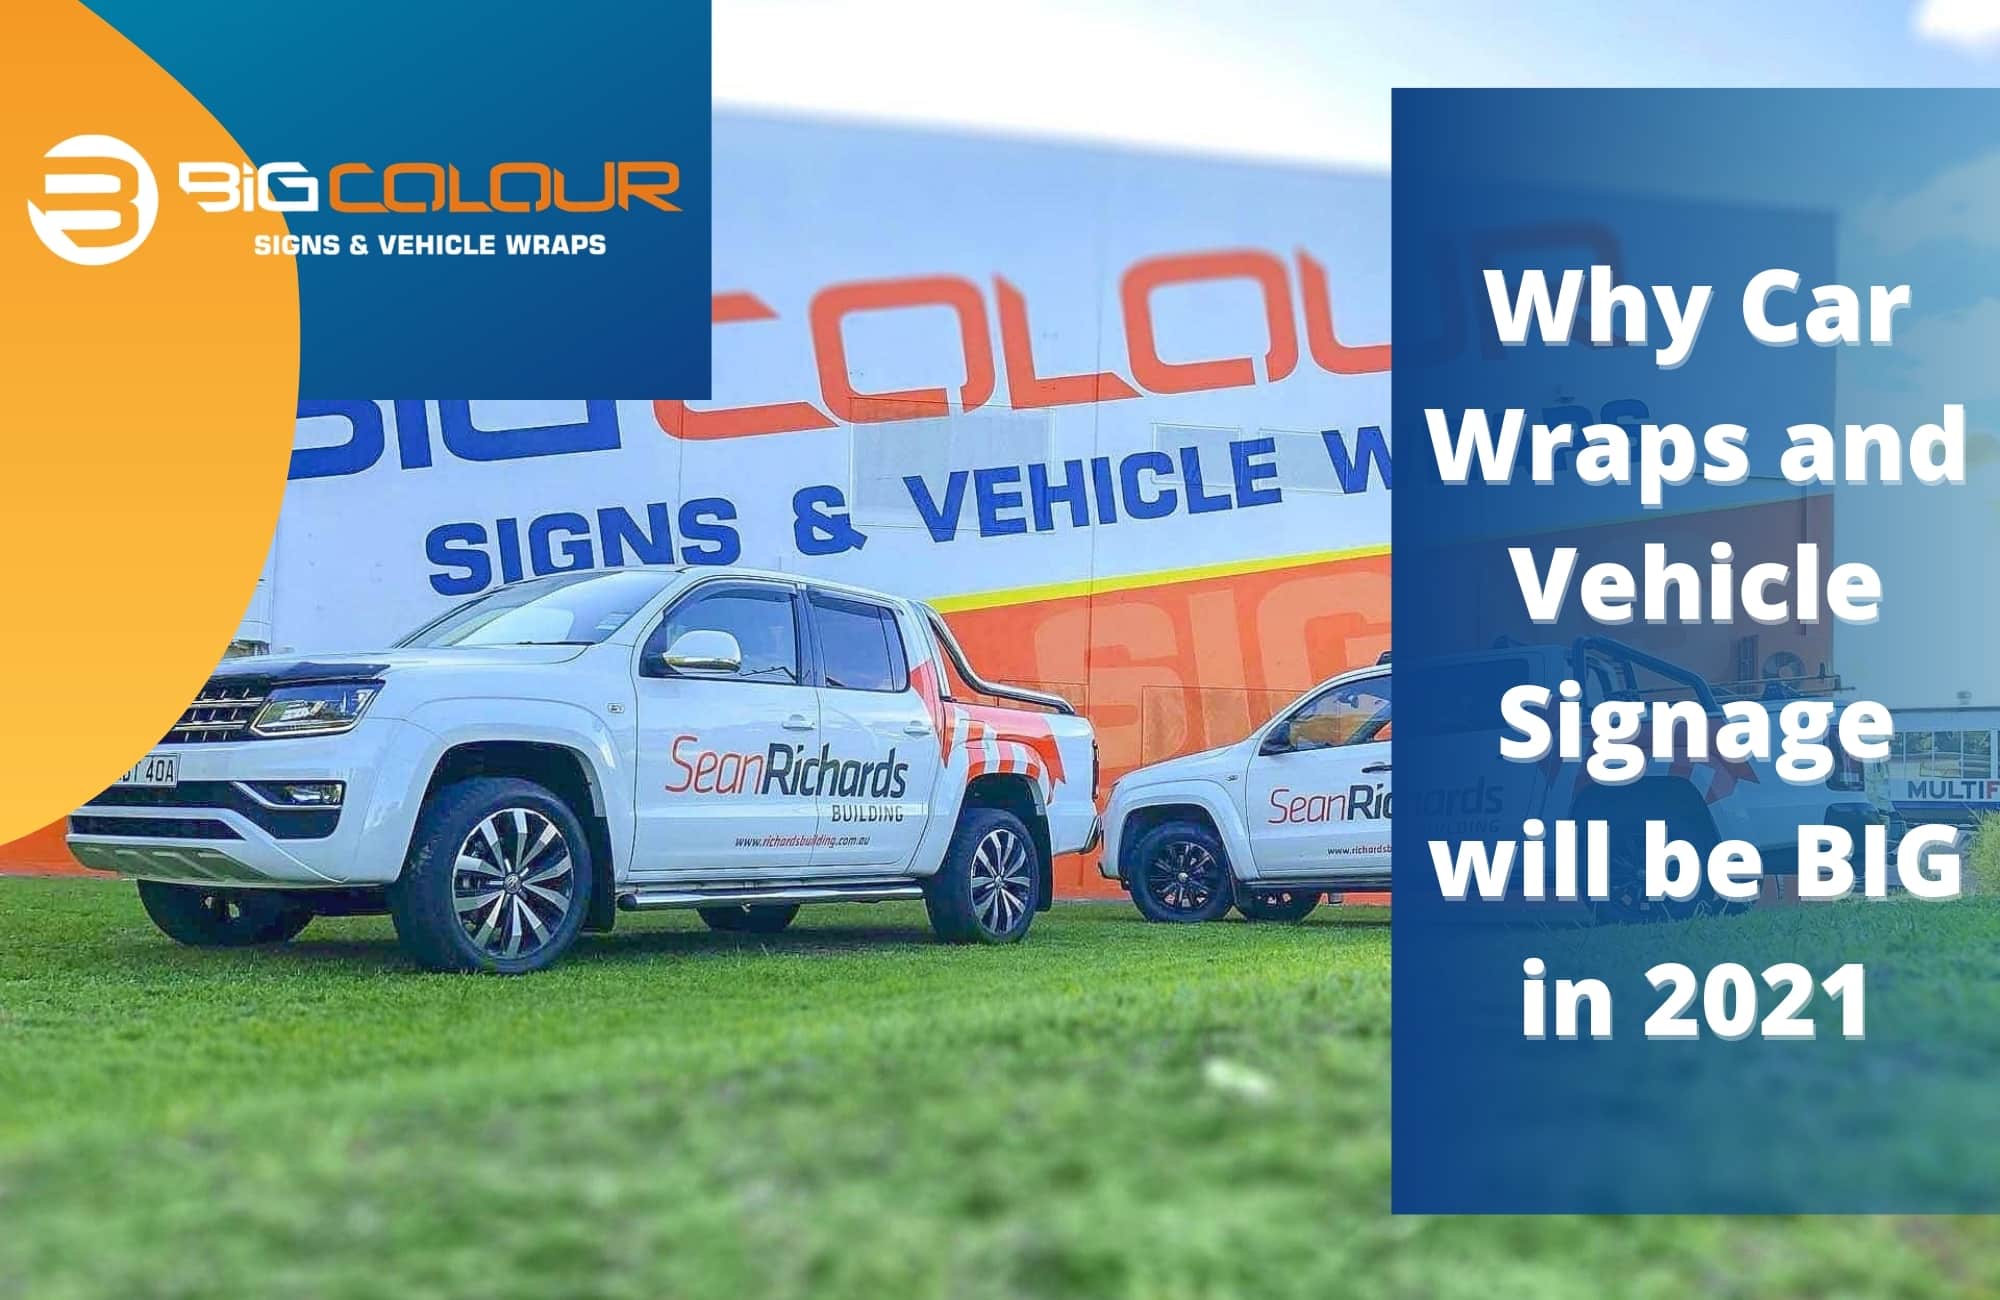 Why Car Wraps and Vehicle Signage will be BIG in 2021